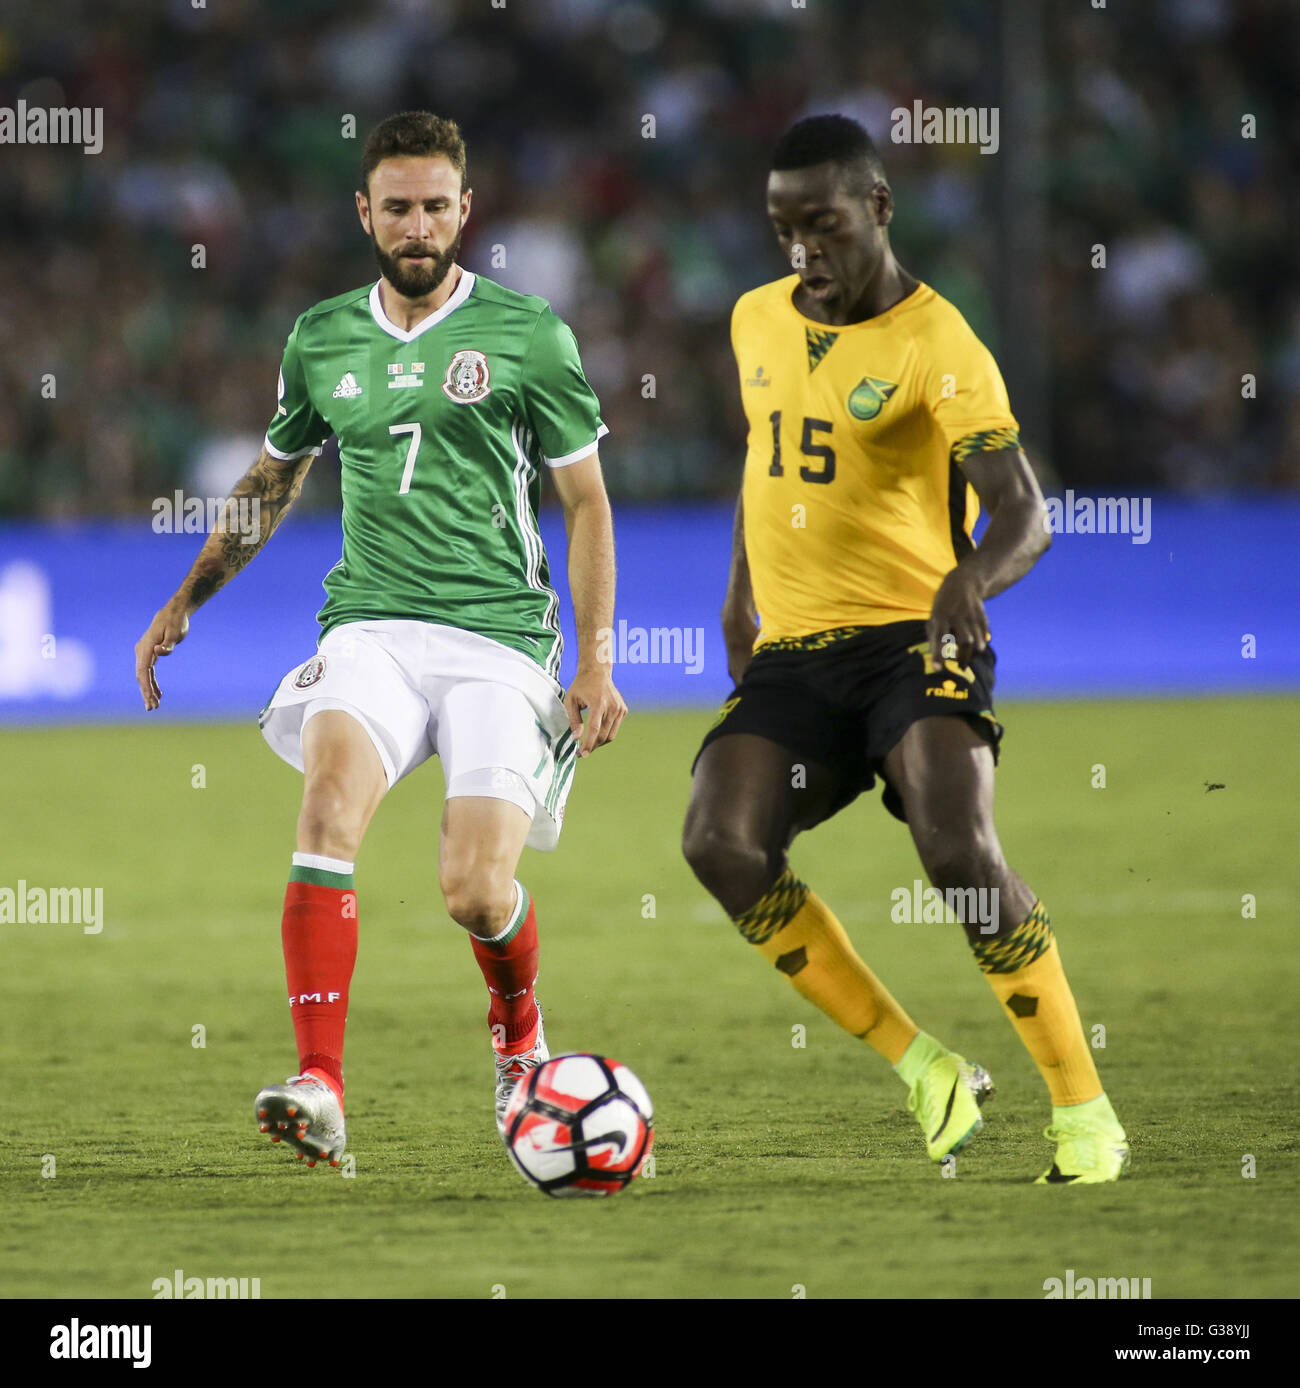 Los Angeles, California, USA. 9th June, 2016. Mexico defender Miguel Layun #7 and Jamaica midfielder Je-Vanghn Watson #15 in a Copa America soccer match between Mexico and ÃŠJamaica of Group C at the Rose Bowl in Pasadena, California, June 9, 2016. Mexico won 2-0. Credit:  Ringo Chiu/ZUMA Wire/Alamy Live News Stock Photo